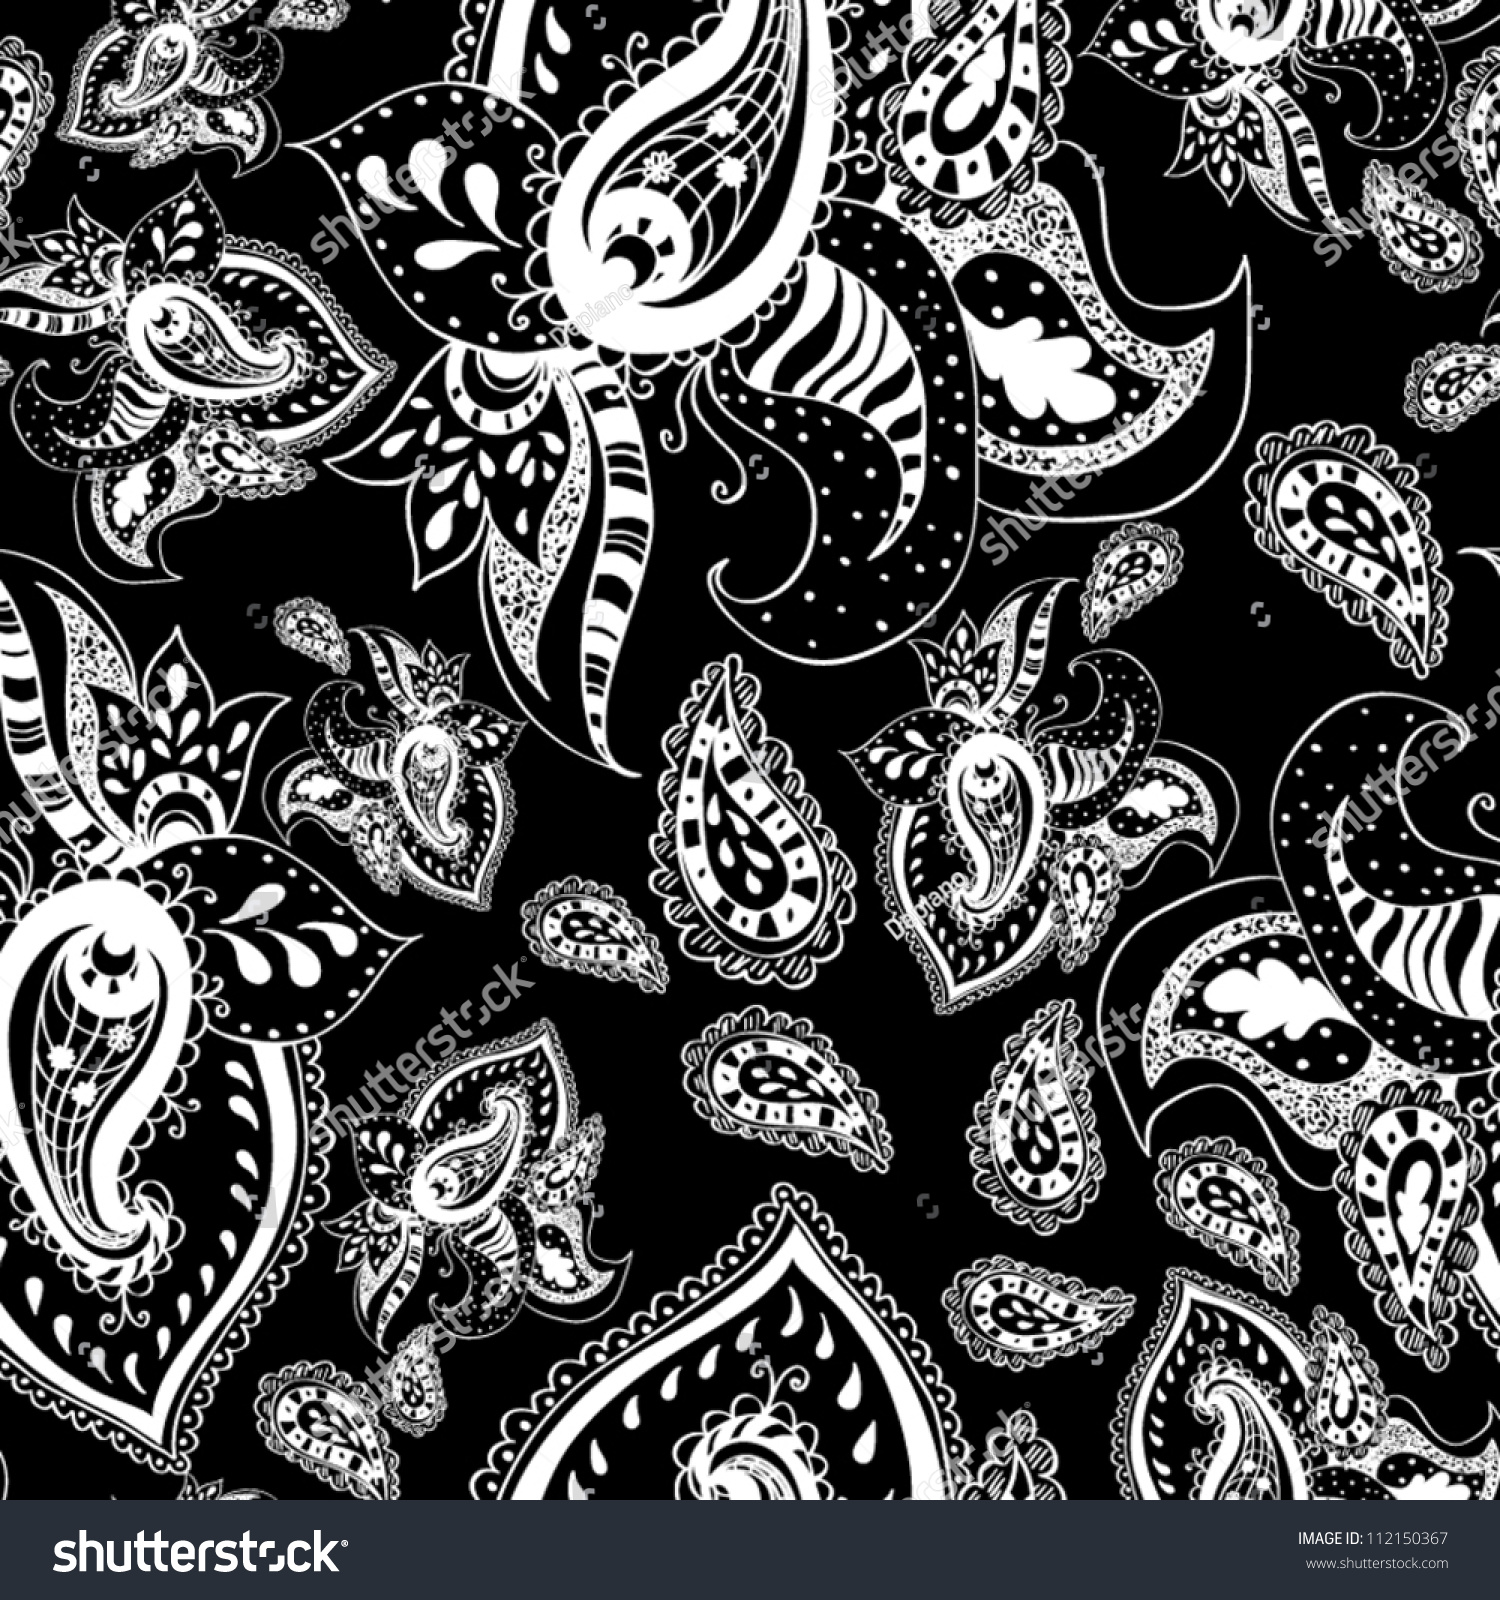 Black White Seamless Pattern Abstract Seamless Stock Vector 112150367 ...